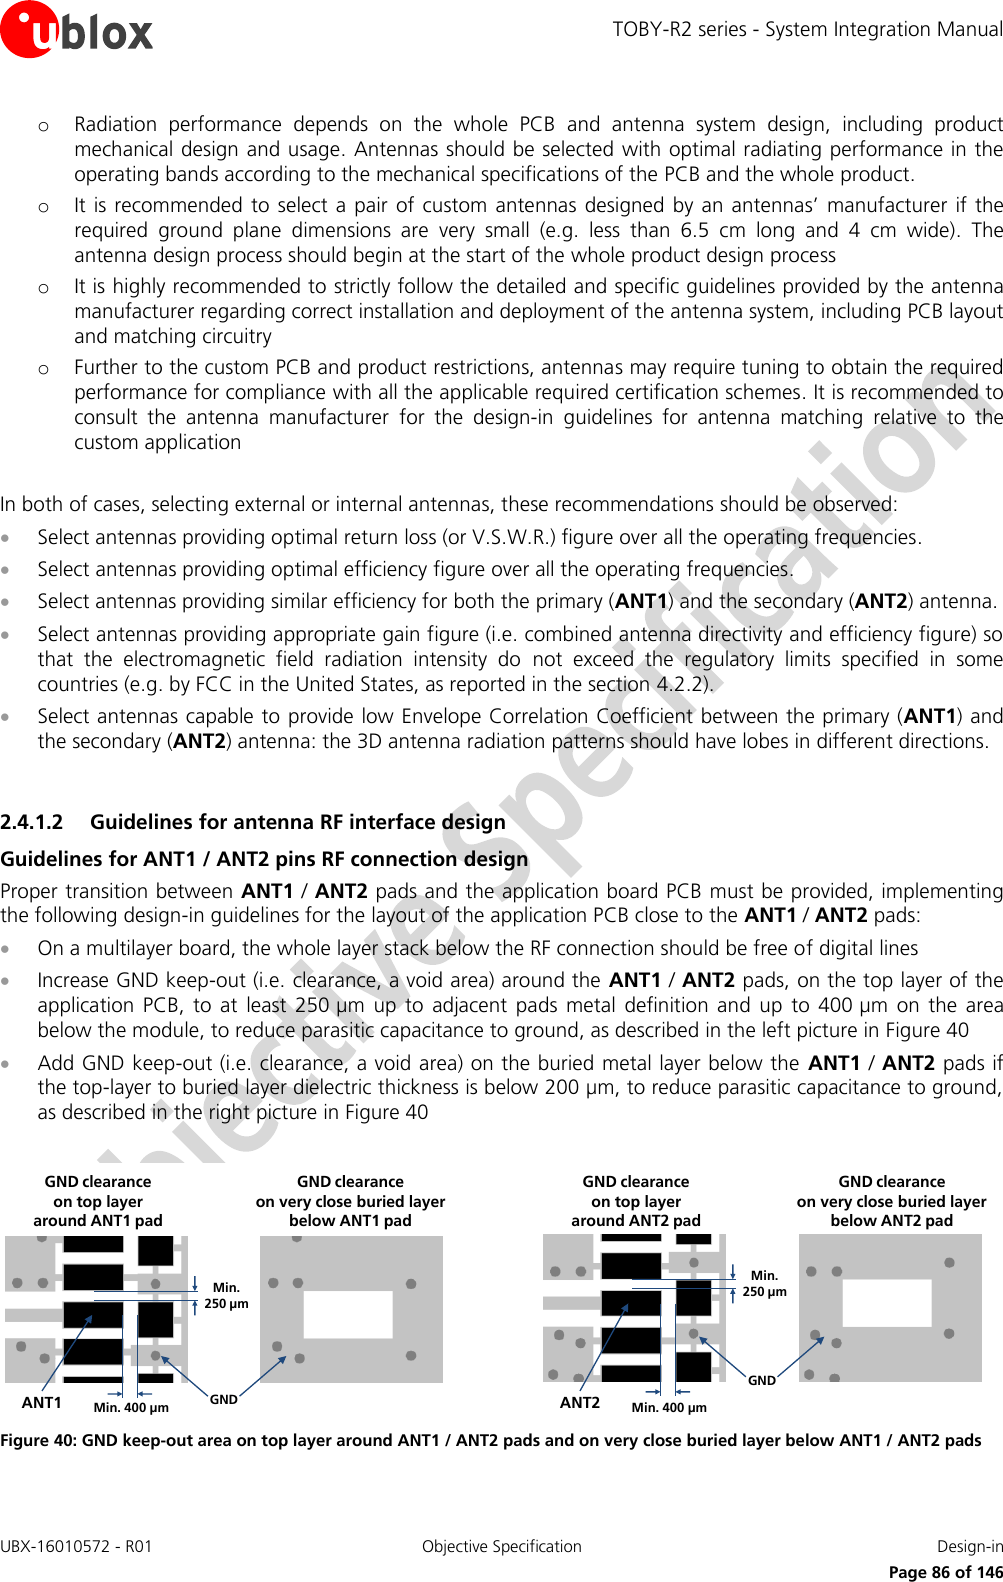 TOBY-R2 series - System Integration Manual UBX-16010572 - R01  Objective Specification  Design-in     Page 86 of 146 o Radiation  performance  depends  on  the  whole  PCB  and  antenna  system  design,  including  product mechanical design and usage. Antennas should be selected with optimal radiating performance in the operating bands according to the mechanical specifications of the PCB and the whole product. o It is recommended to select a  pair  of custom antennas  designed by an  antennas’  manufacturer if  the required  ground  plane  dimensions  are  very  small  (e.g.  less  than  6.5  cm  long  and  4  cm  wide).  The antenna design process should begin at the start of the whole product design process o It is highly recommended to strictly follow the detailed and specific guidelines provided by the antenna manufacturer regarding correct installation and deployment of the antenna system, including PCB layout and matching circuitry o Further to the custom PCB and product restrictions, antennas may require tuning to obtain the required performance for compliance with all the applicable required certification schemes. It is recommended to consult  the  antenna  manufacturer  for  the  design-in  guidelines  for  antenna  matching  relative  to  the custom application  In both of cases, selecting external or internal antennas, these recommendations should be observed:  Select antennas providing optimal return loss (or V.S.W.R.) figure over all the operating frequencies.  Select antennas providing optimal efficiency figure over all the operating frequencies.  Select antennas providing similar efficiency for both the primary (ANT1) and the secondary (ANT2) antenna.  Select antennas providing appropriate gain figure (i.e. combined antenna directivity and efficiency figure) so that  the  electromagnetic  field  radiation  intensity  do  not  exceed  the  regulatory  limits  specified  in  some countries (e.g. by FCC in the United States, as reported in the section 4.2.2).  Select antennas capable to provide low Envelope Correlation Coefficient between the primary (ANT1) and the secondary (ANT2) antenna: the 3D antenna radiation patterns should have lobes in different directions.  2.4.1.2 Guidelines for antenna RF interface design Guidelines for ANT1 / ANT2 pins RF connection design Proper transition between ANT1 / ANT2 pads and the application board PCB must be provided, implementing the following design-in guidelines for the layout of the application PCB close to the ANT1 / ANT2 pads:  On a multilayer board, the whole layer stack below the RF connection should be free of digital lines  Increase GND keep-out (i.e. clearance, a void area) around the ANT1 / ANT2 pads, on the top layer of the application  PCB,  to  at  least  250 µm  up  to  adjacent  pads  metal  definition and  up  to  400 µm  on  the  area below the module, to reduce parasitic capacitance to ground, as described in the left picture in Figure 40  Add GND keep-out (i.e. clearance, a void area) on the buried metal layer below the  ANT1 / ANT2 pads if the top-layer to buried layer dielectric thickness is below 200 µm, to reduce parasitic capacitance to ground, as described in the right picture in Figure 40  Min. 250 µmMin. 400 µm GNDANT1GND clearance on very close buried layerbelow ANT1 padGND clearance on top layer around ANT1 padMin. 250 µmMin. 400 µmGNDANT2GND clearance on very close buried layerbelow ANT2 padGND clearance on top layer around ANT2 pad Figure 40: GND keep-out area on top layer around ANT1 / ANT2 pads and on very close buried layer below ANT1 / ANT2 pads  